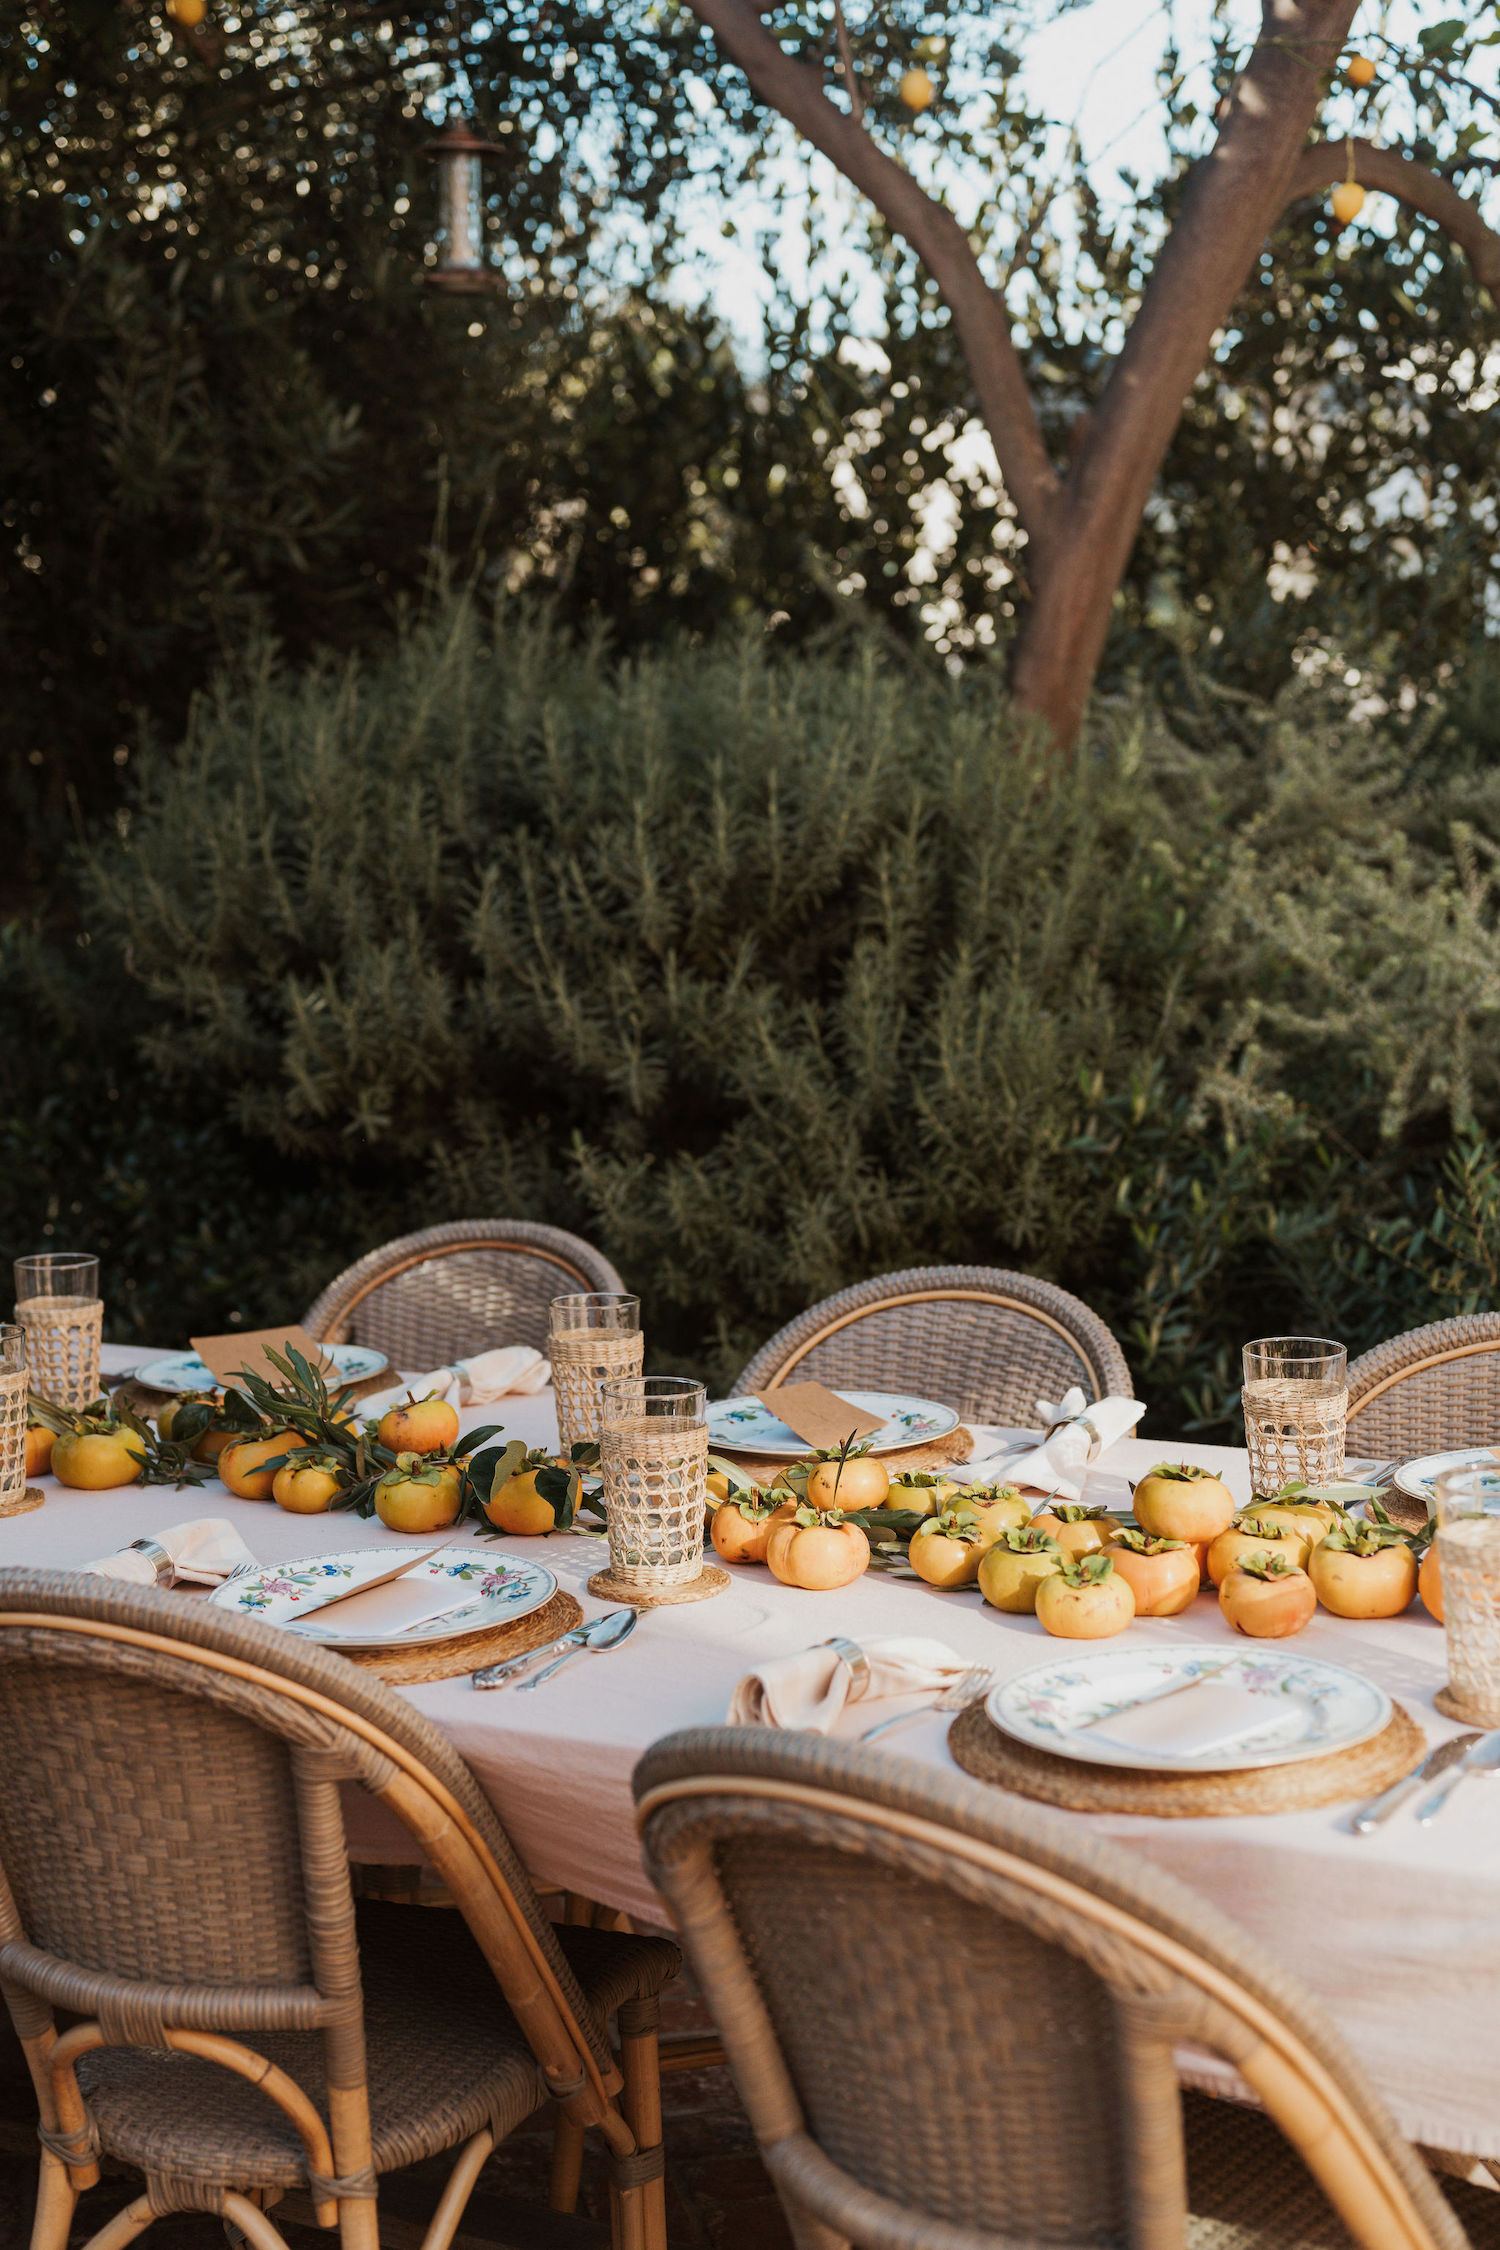 Laurel Gallucci, Sweet Laurel founder, Friendsgiving Brunch at Home in Los Angeles, backyard dinner party table, spring, persimmons